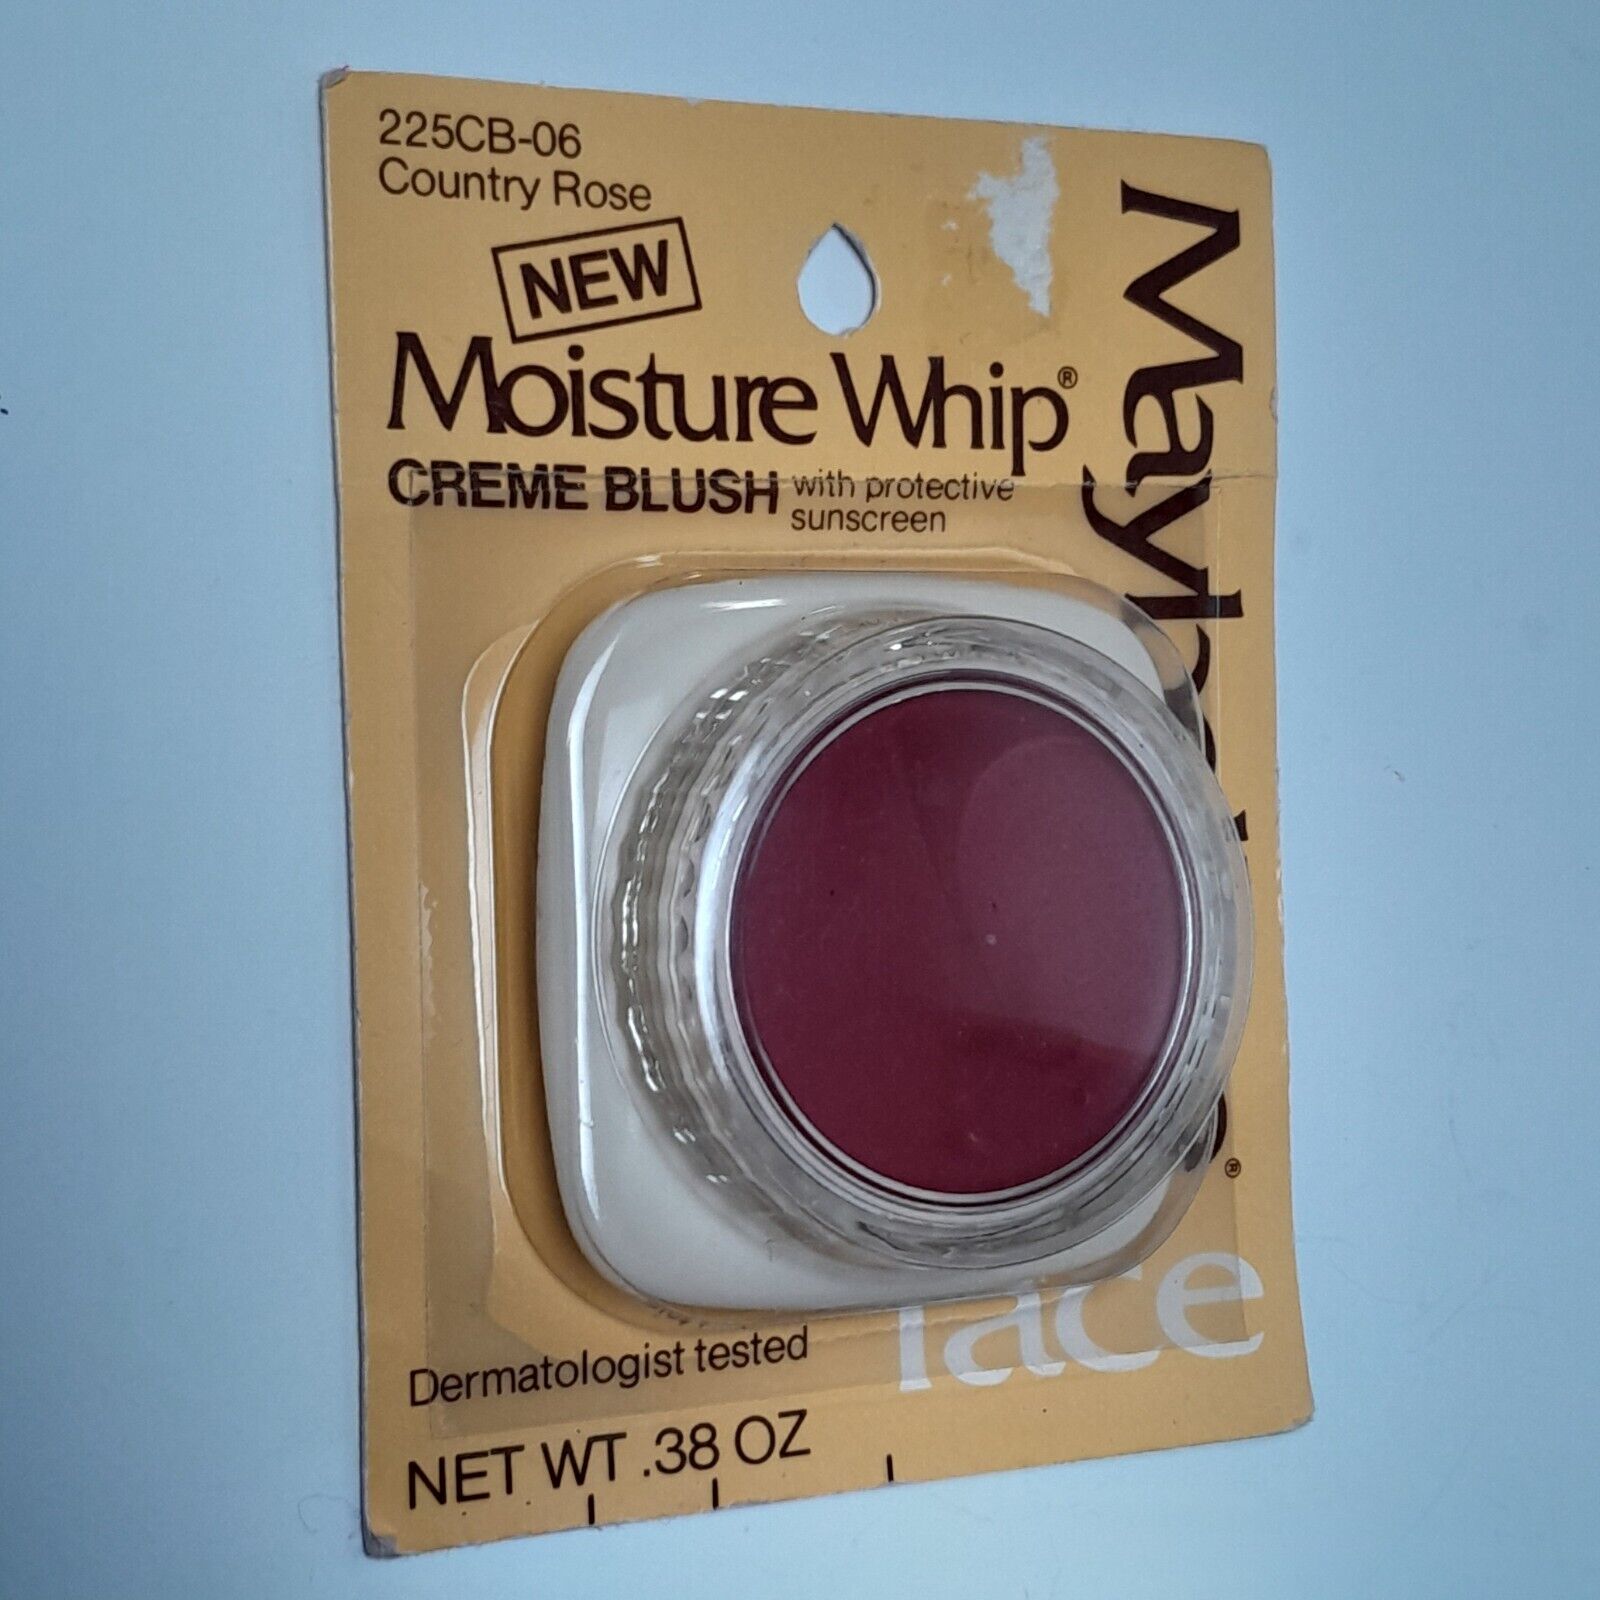 Rare 1980 Maybelline Moisture Whip 225CB-06 Country Rose With Sunscreen New